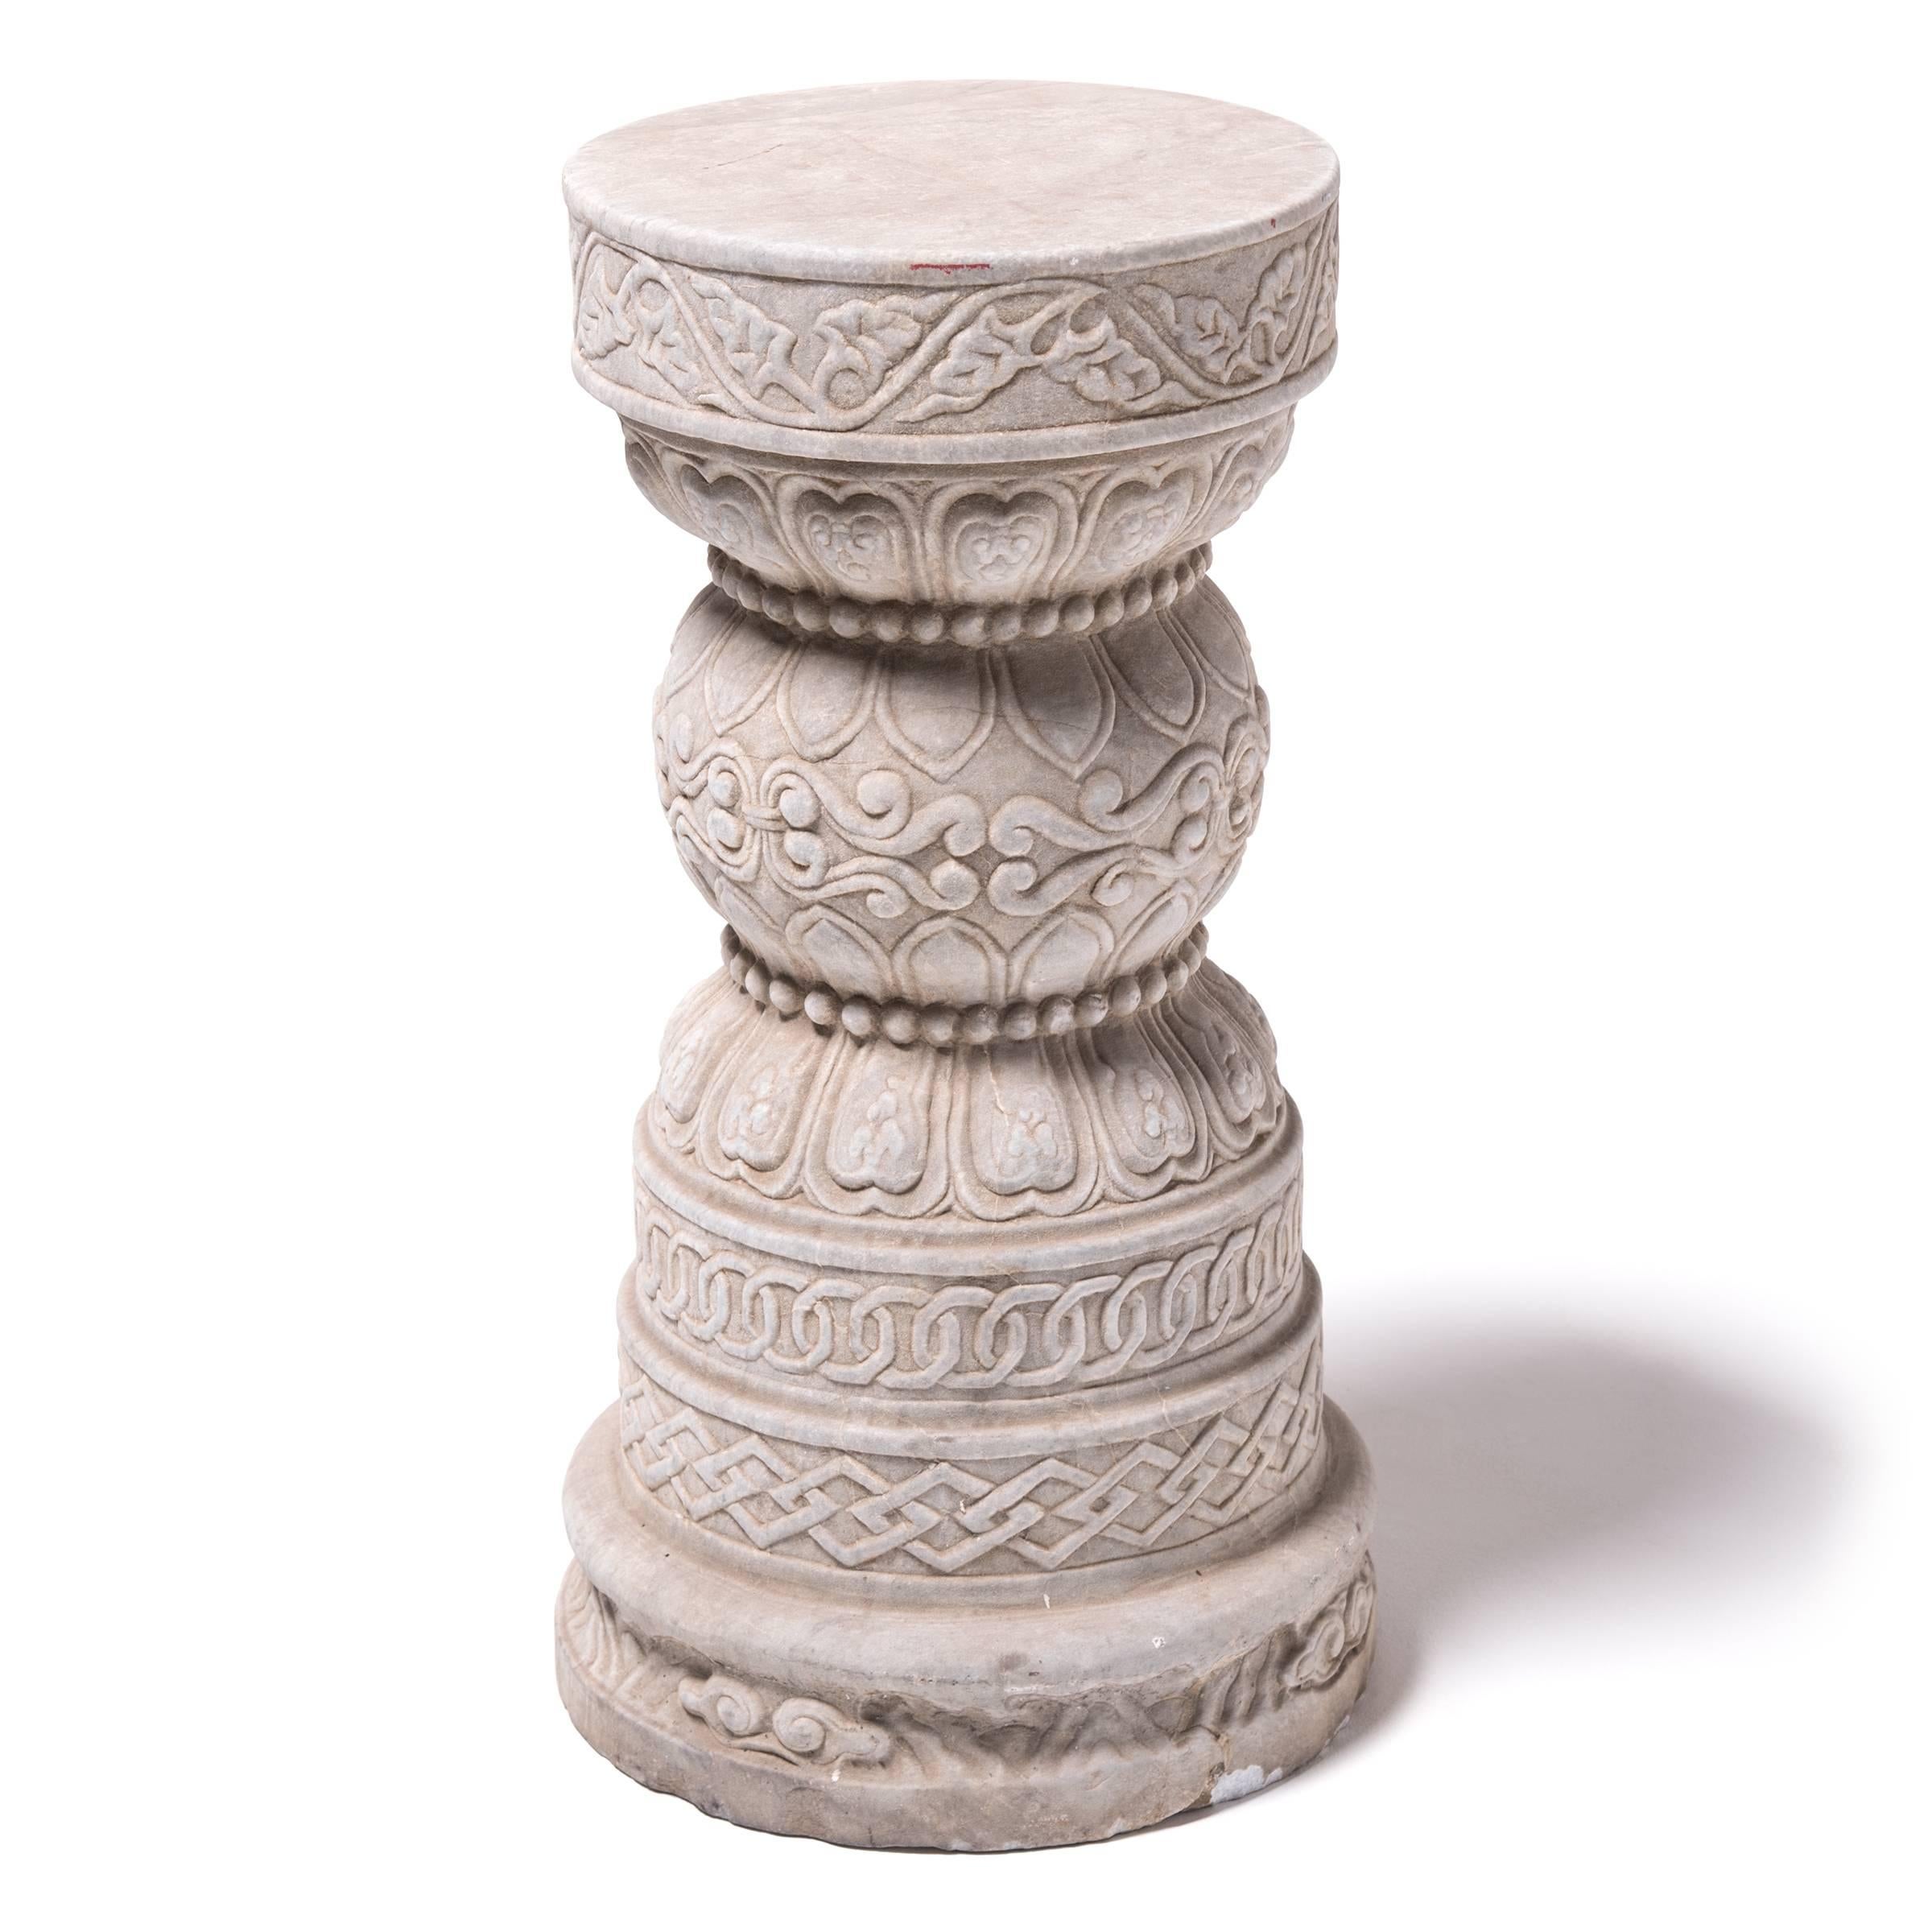 Intricately carved from white marble with subtle natural veining, this kind of pedestal would have graced the garden of a courtly home in Southern China at the turn of the 19th century. Textured with carved geometric and botanical motifs, the